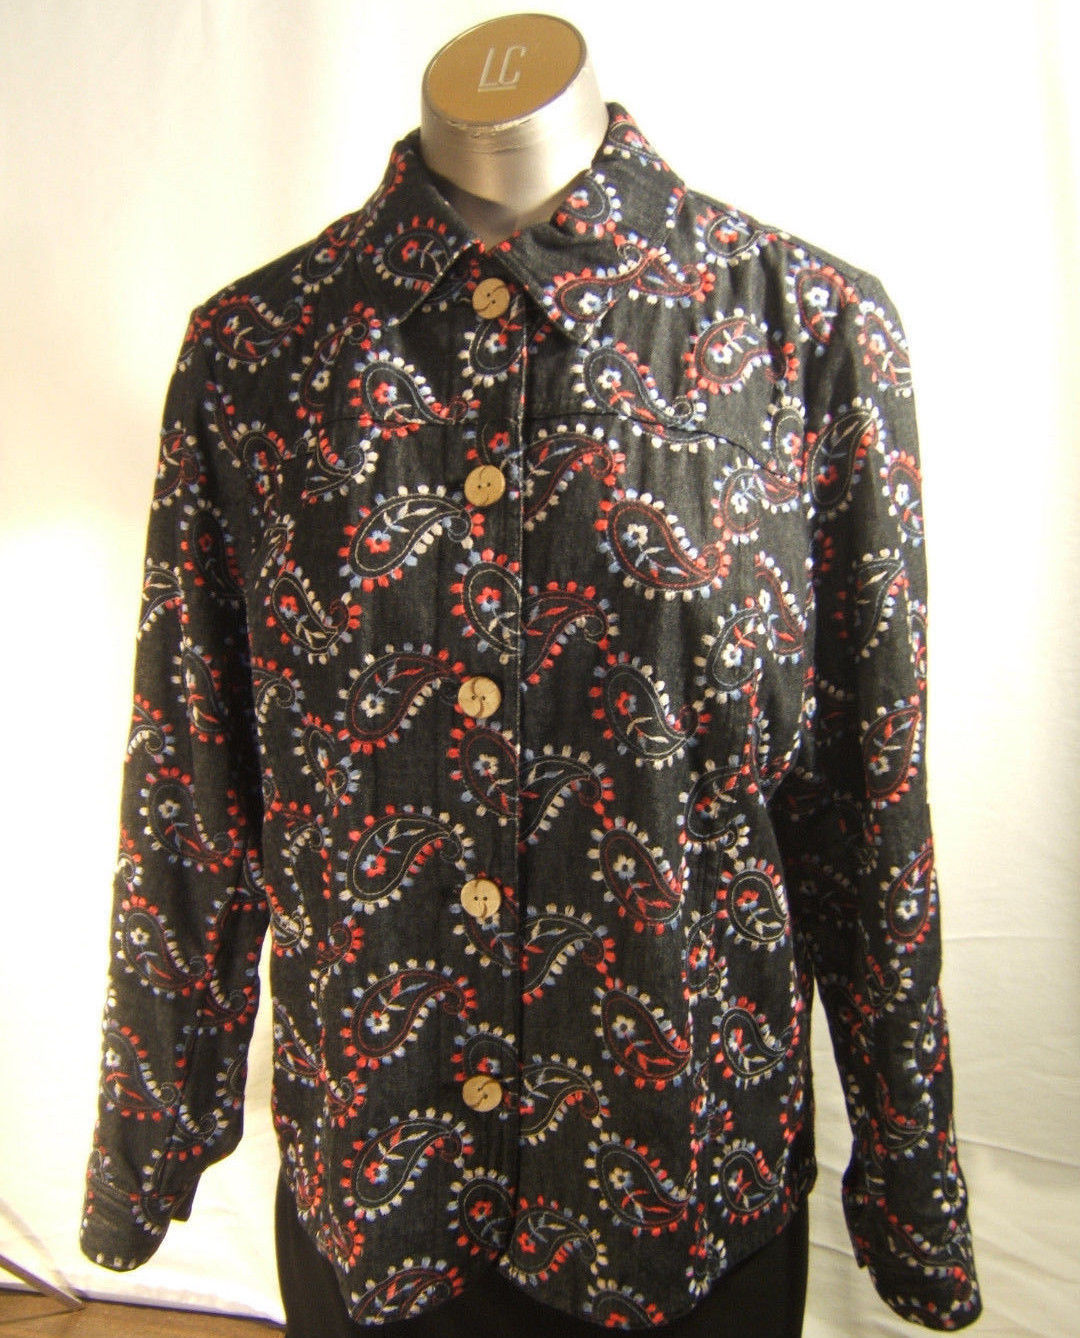 Coldwater Creek Black Denim  Jacket Paisley Embroidered  Front Button  size PM - $15.55